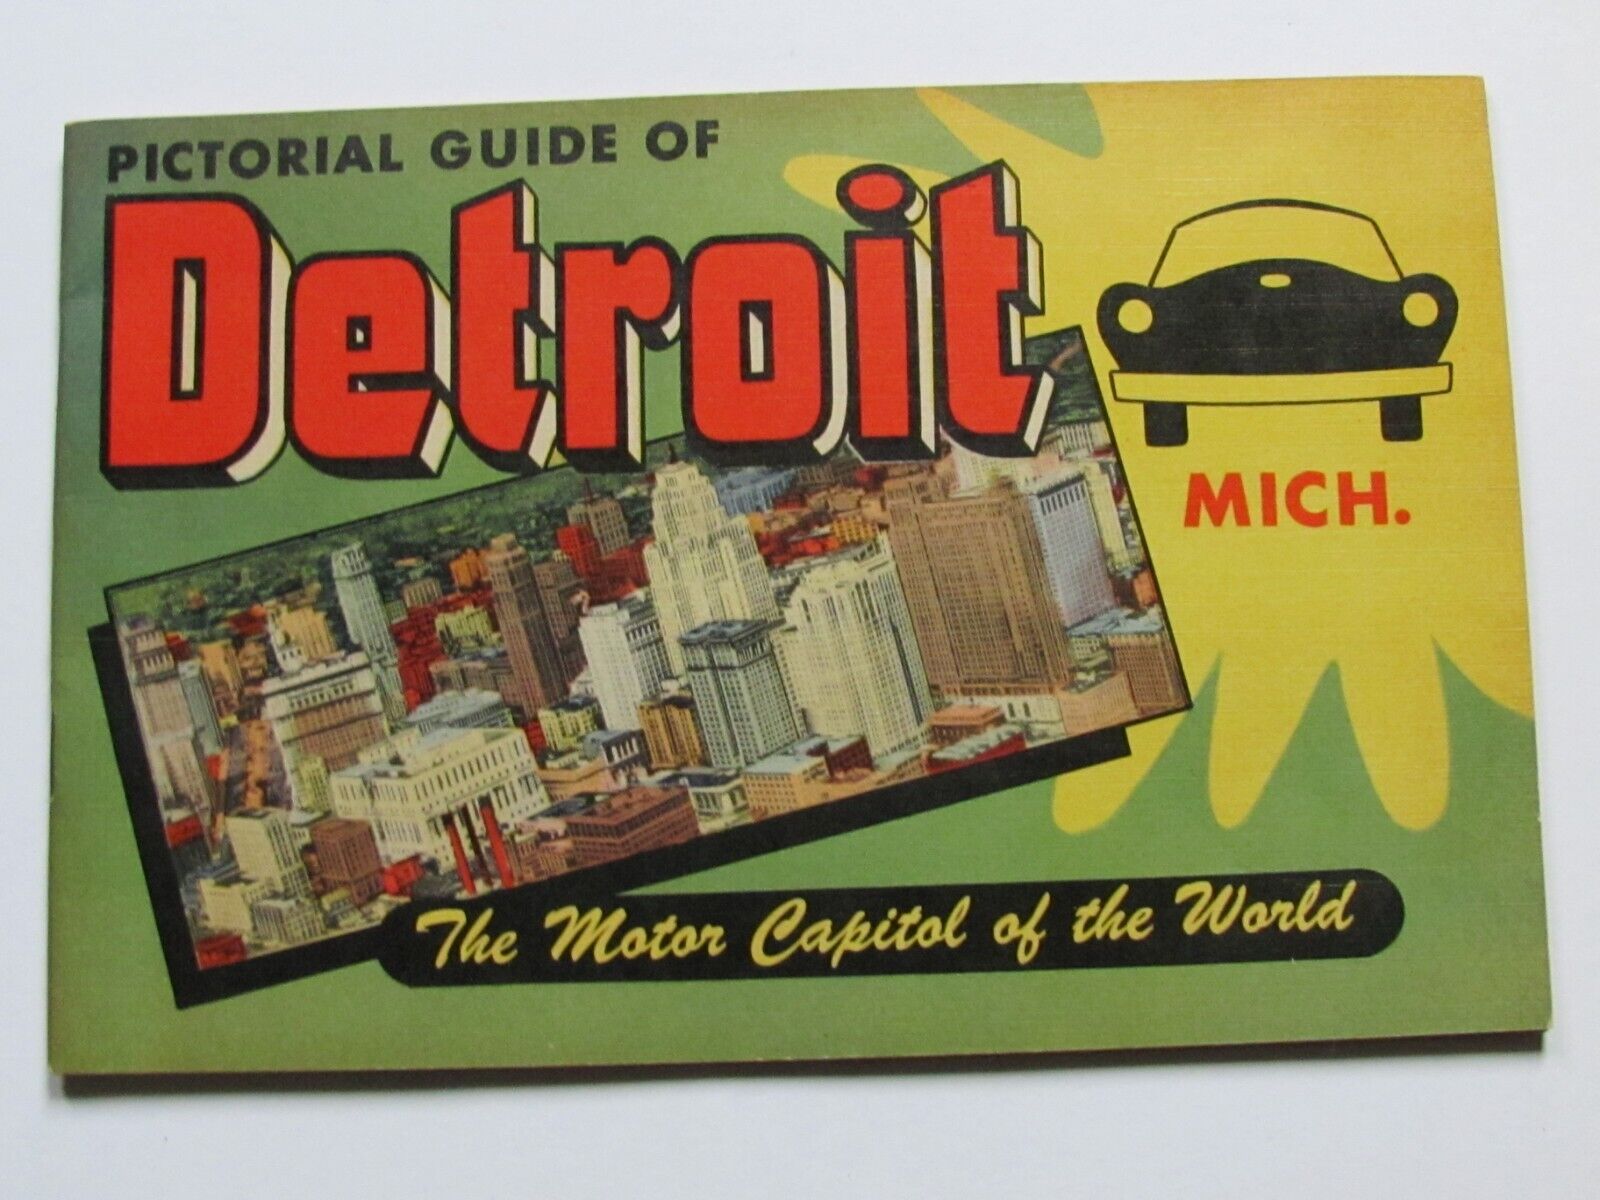 1951 BOOKLET PICTORIAL GUIDE OF DETROIT MICHIGAN THE MOTOR CAPITOL